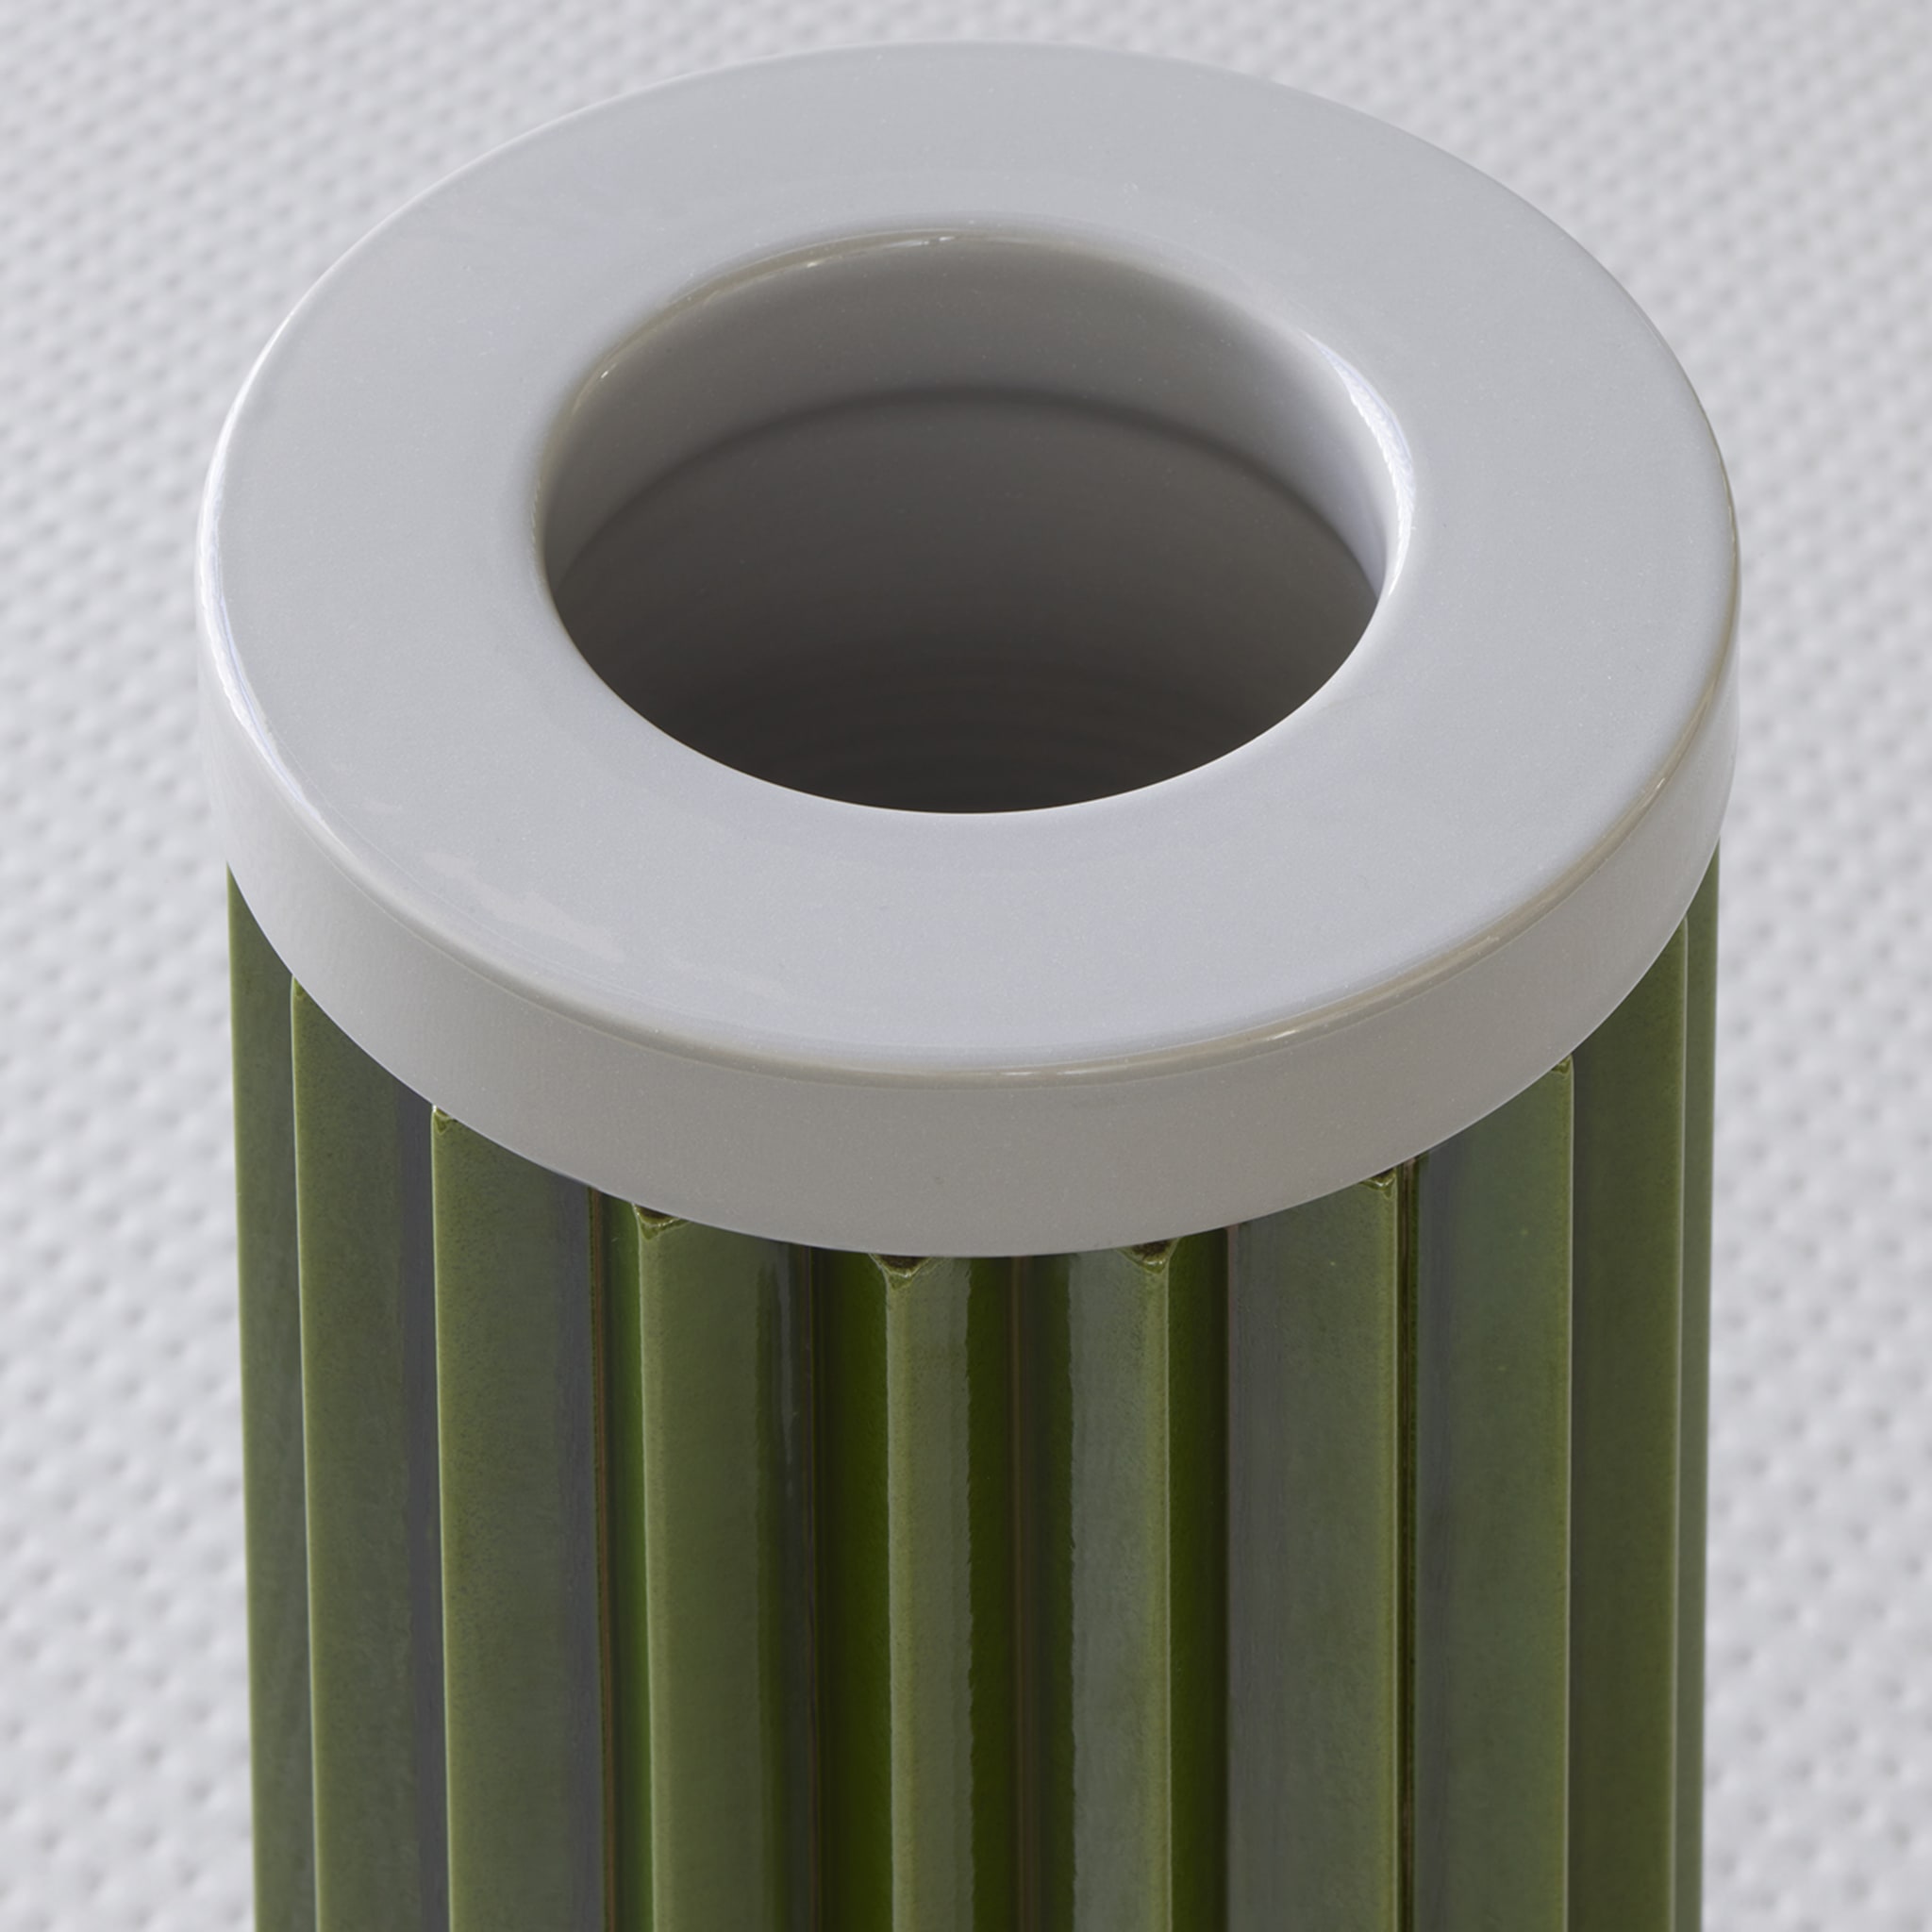 Rombini A Green and Gray Vase by Ronan & Erwan Bouroullec - Alternative view 1